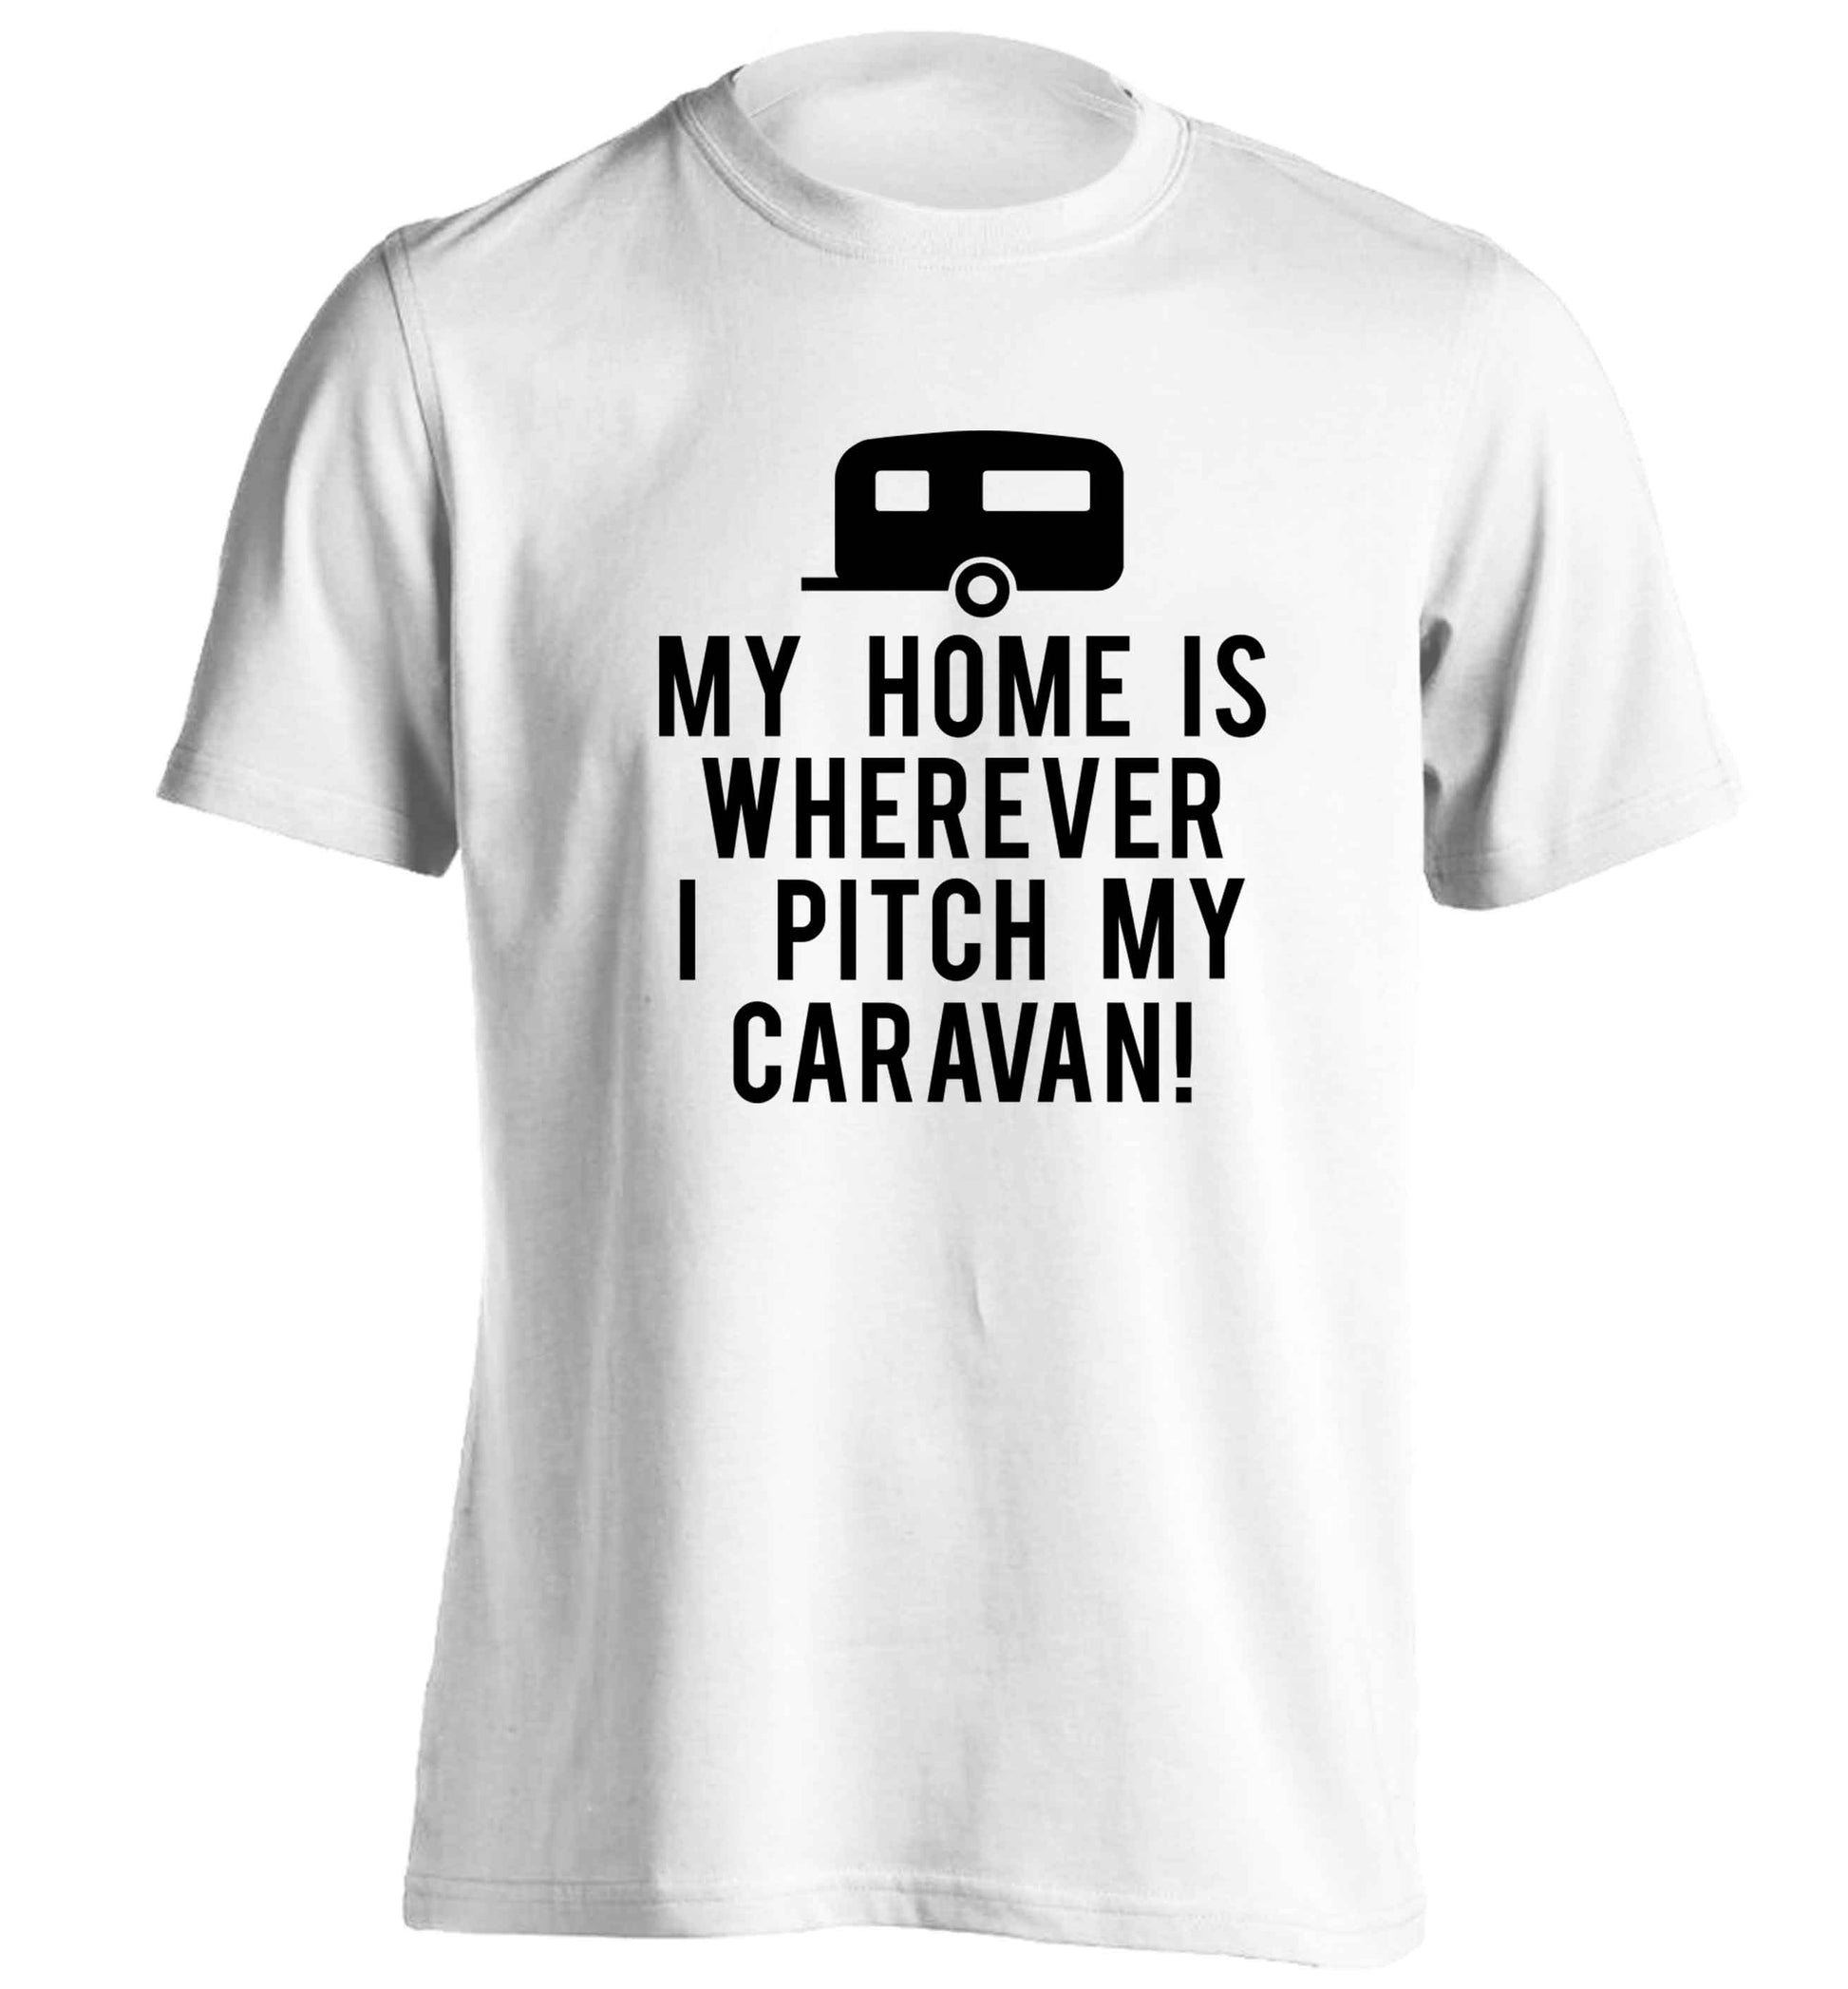 My home is wherever I pitch my caravan adults unisex white Tshirt 2XL